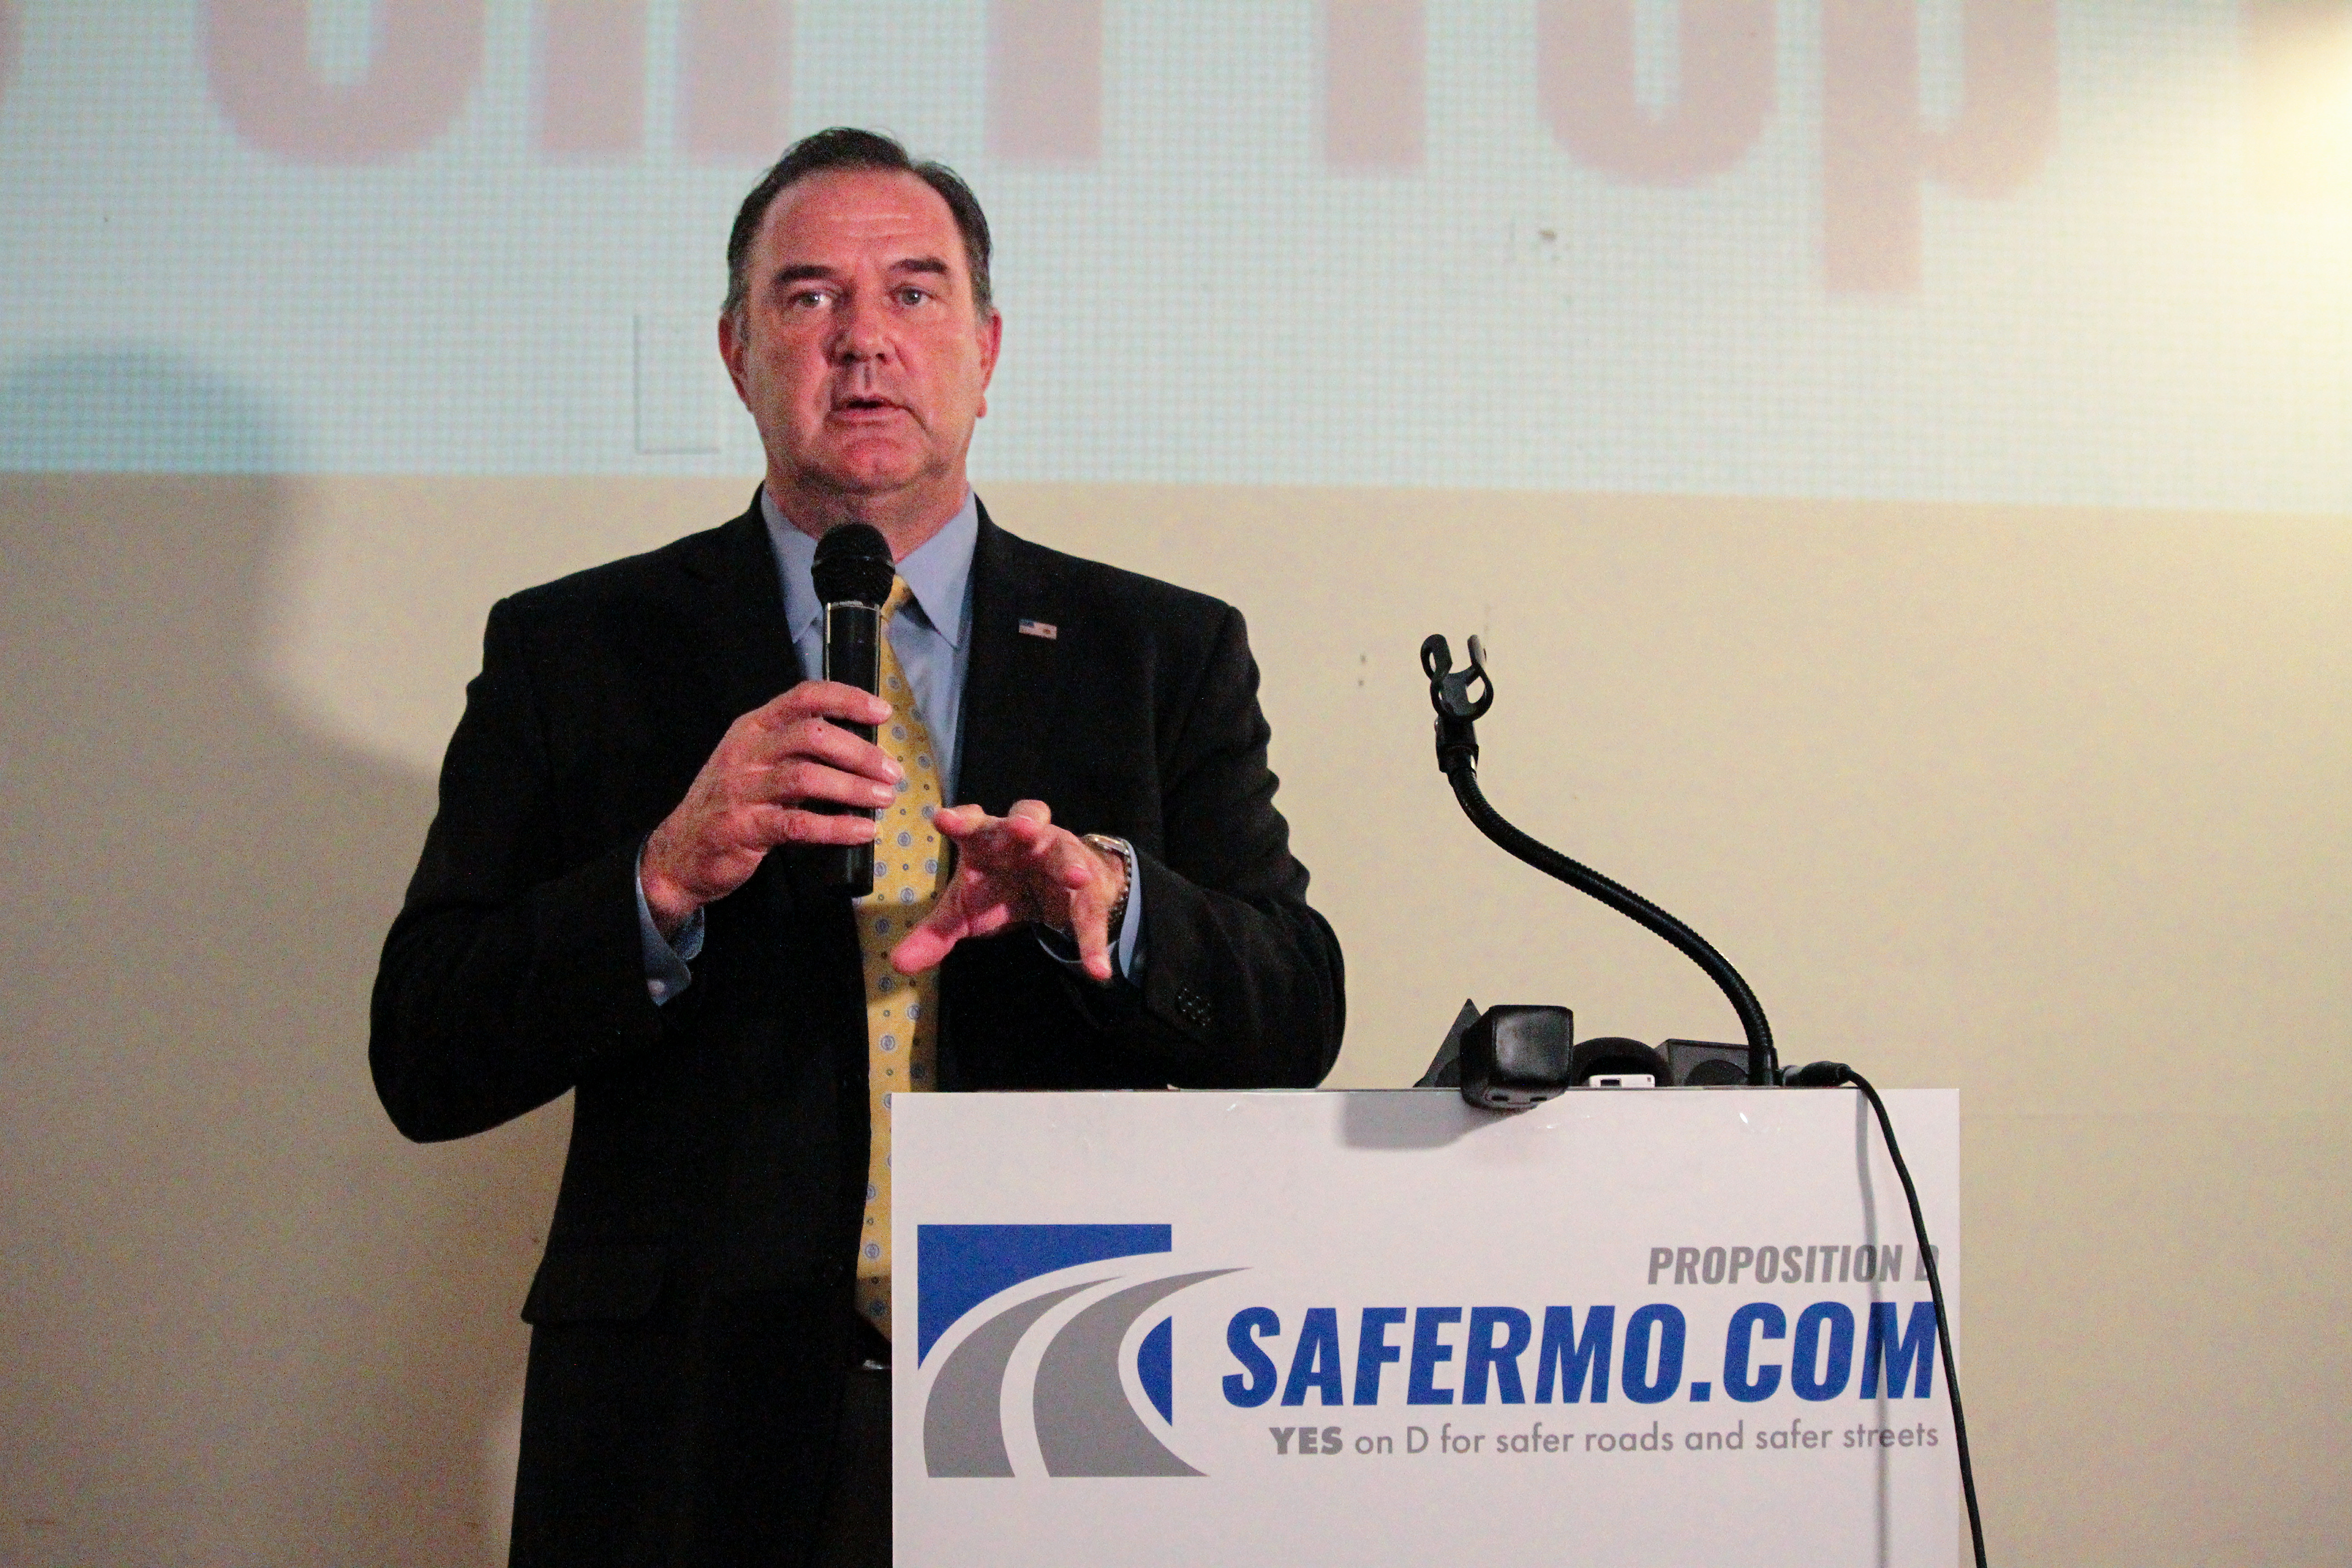 Lt. Gov. Mike Kehoe speaks at the Jefferson City launch of the campaign in support of Prop D (ALISHA SHURR/THE MISSOURI TIMES).